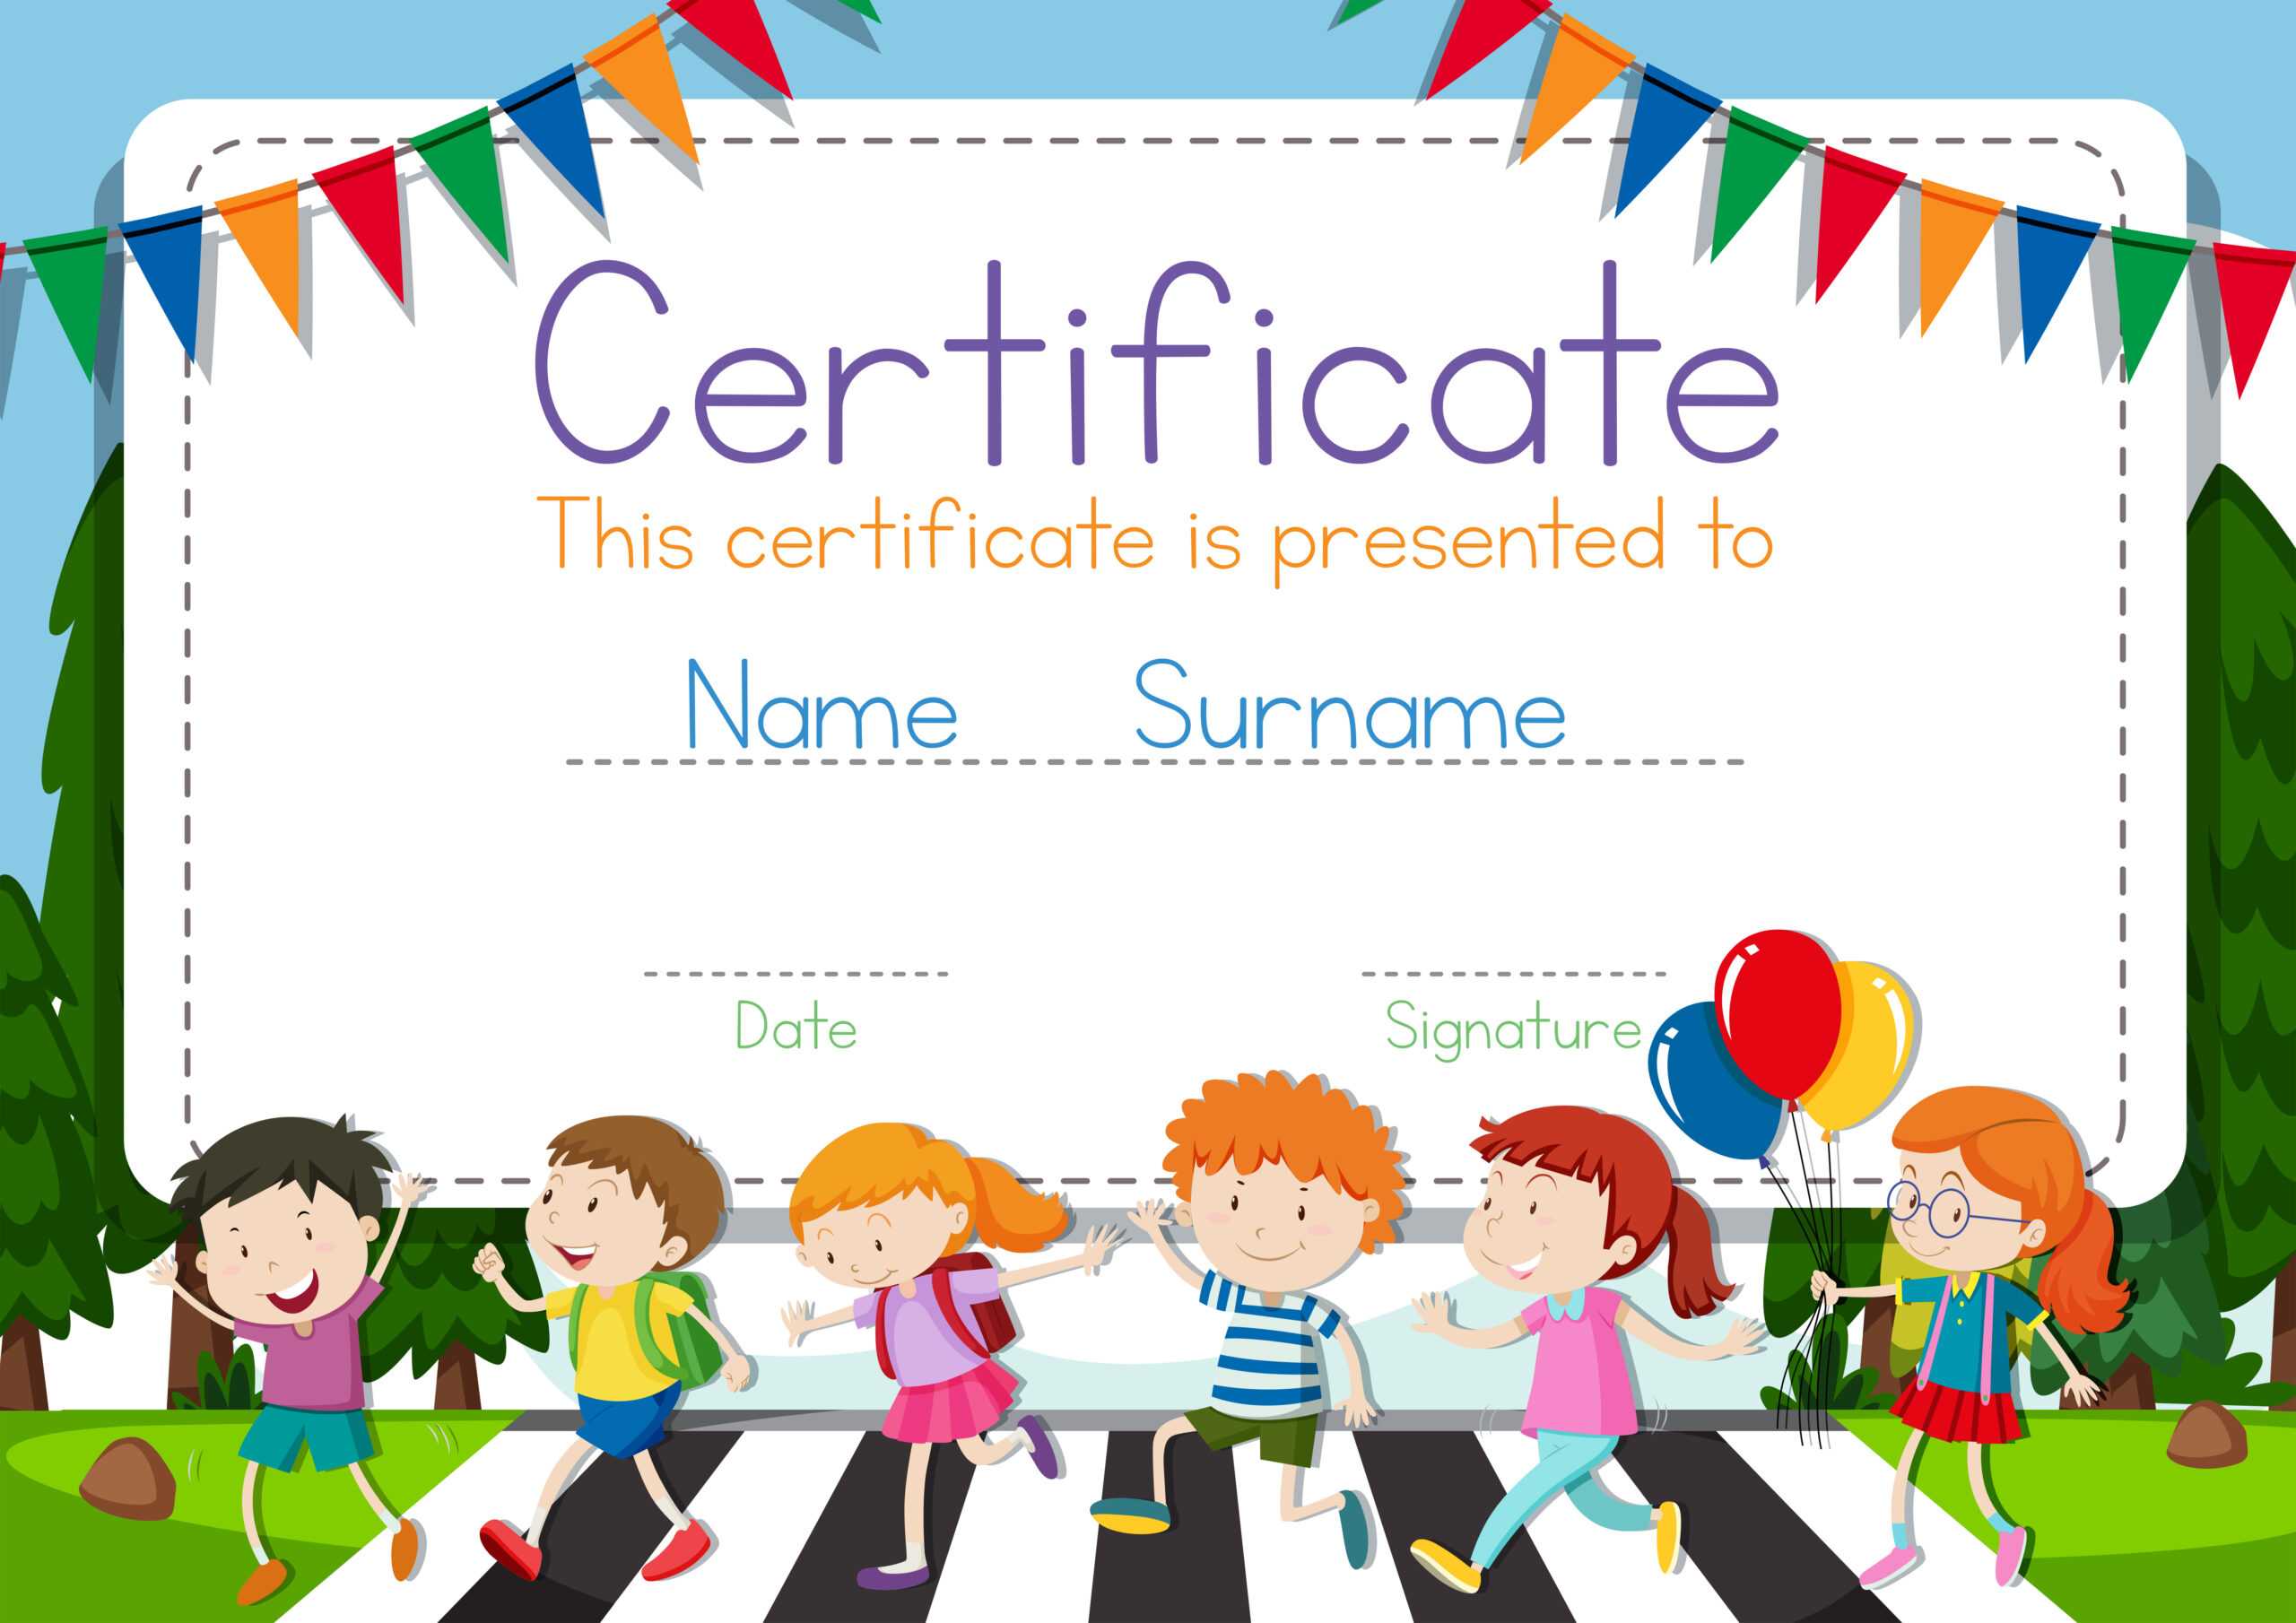 Certificate Template With Children Crossing Road Background Pertaining To Crossing The Line Certificate Template